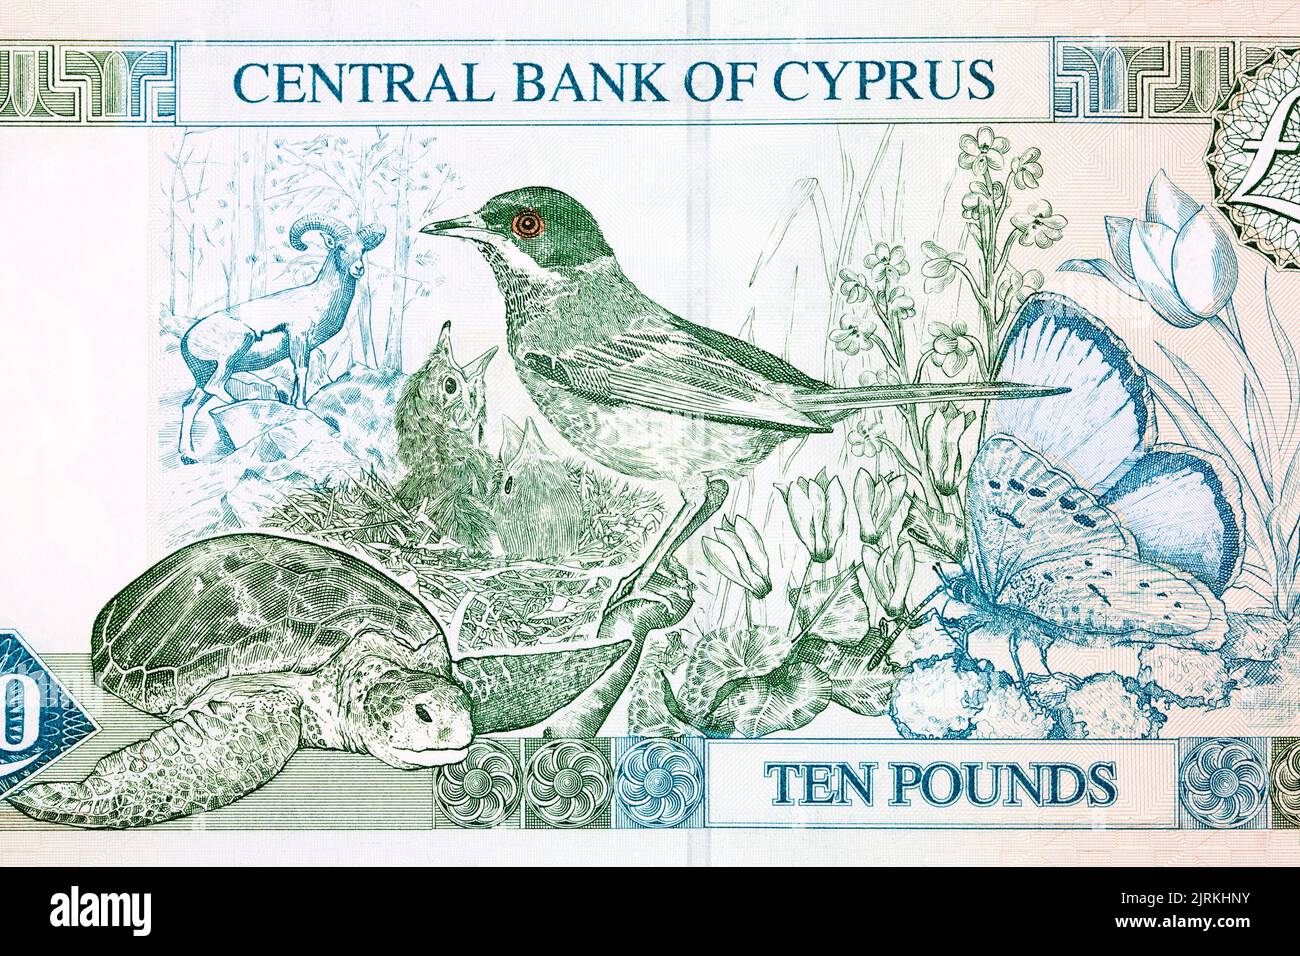 Cyprus warbler, green turtle, Paphos blue butterfly, Cyprus mouflon, Tulipa cypria, Cyclamen from money - Cypriot Pounds Stock Photo